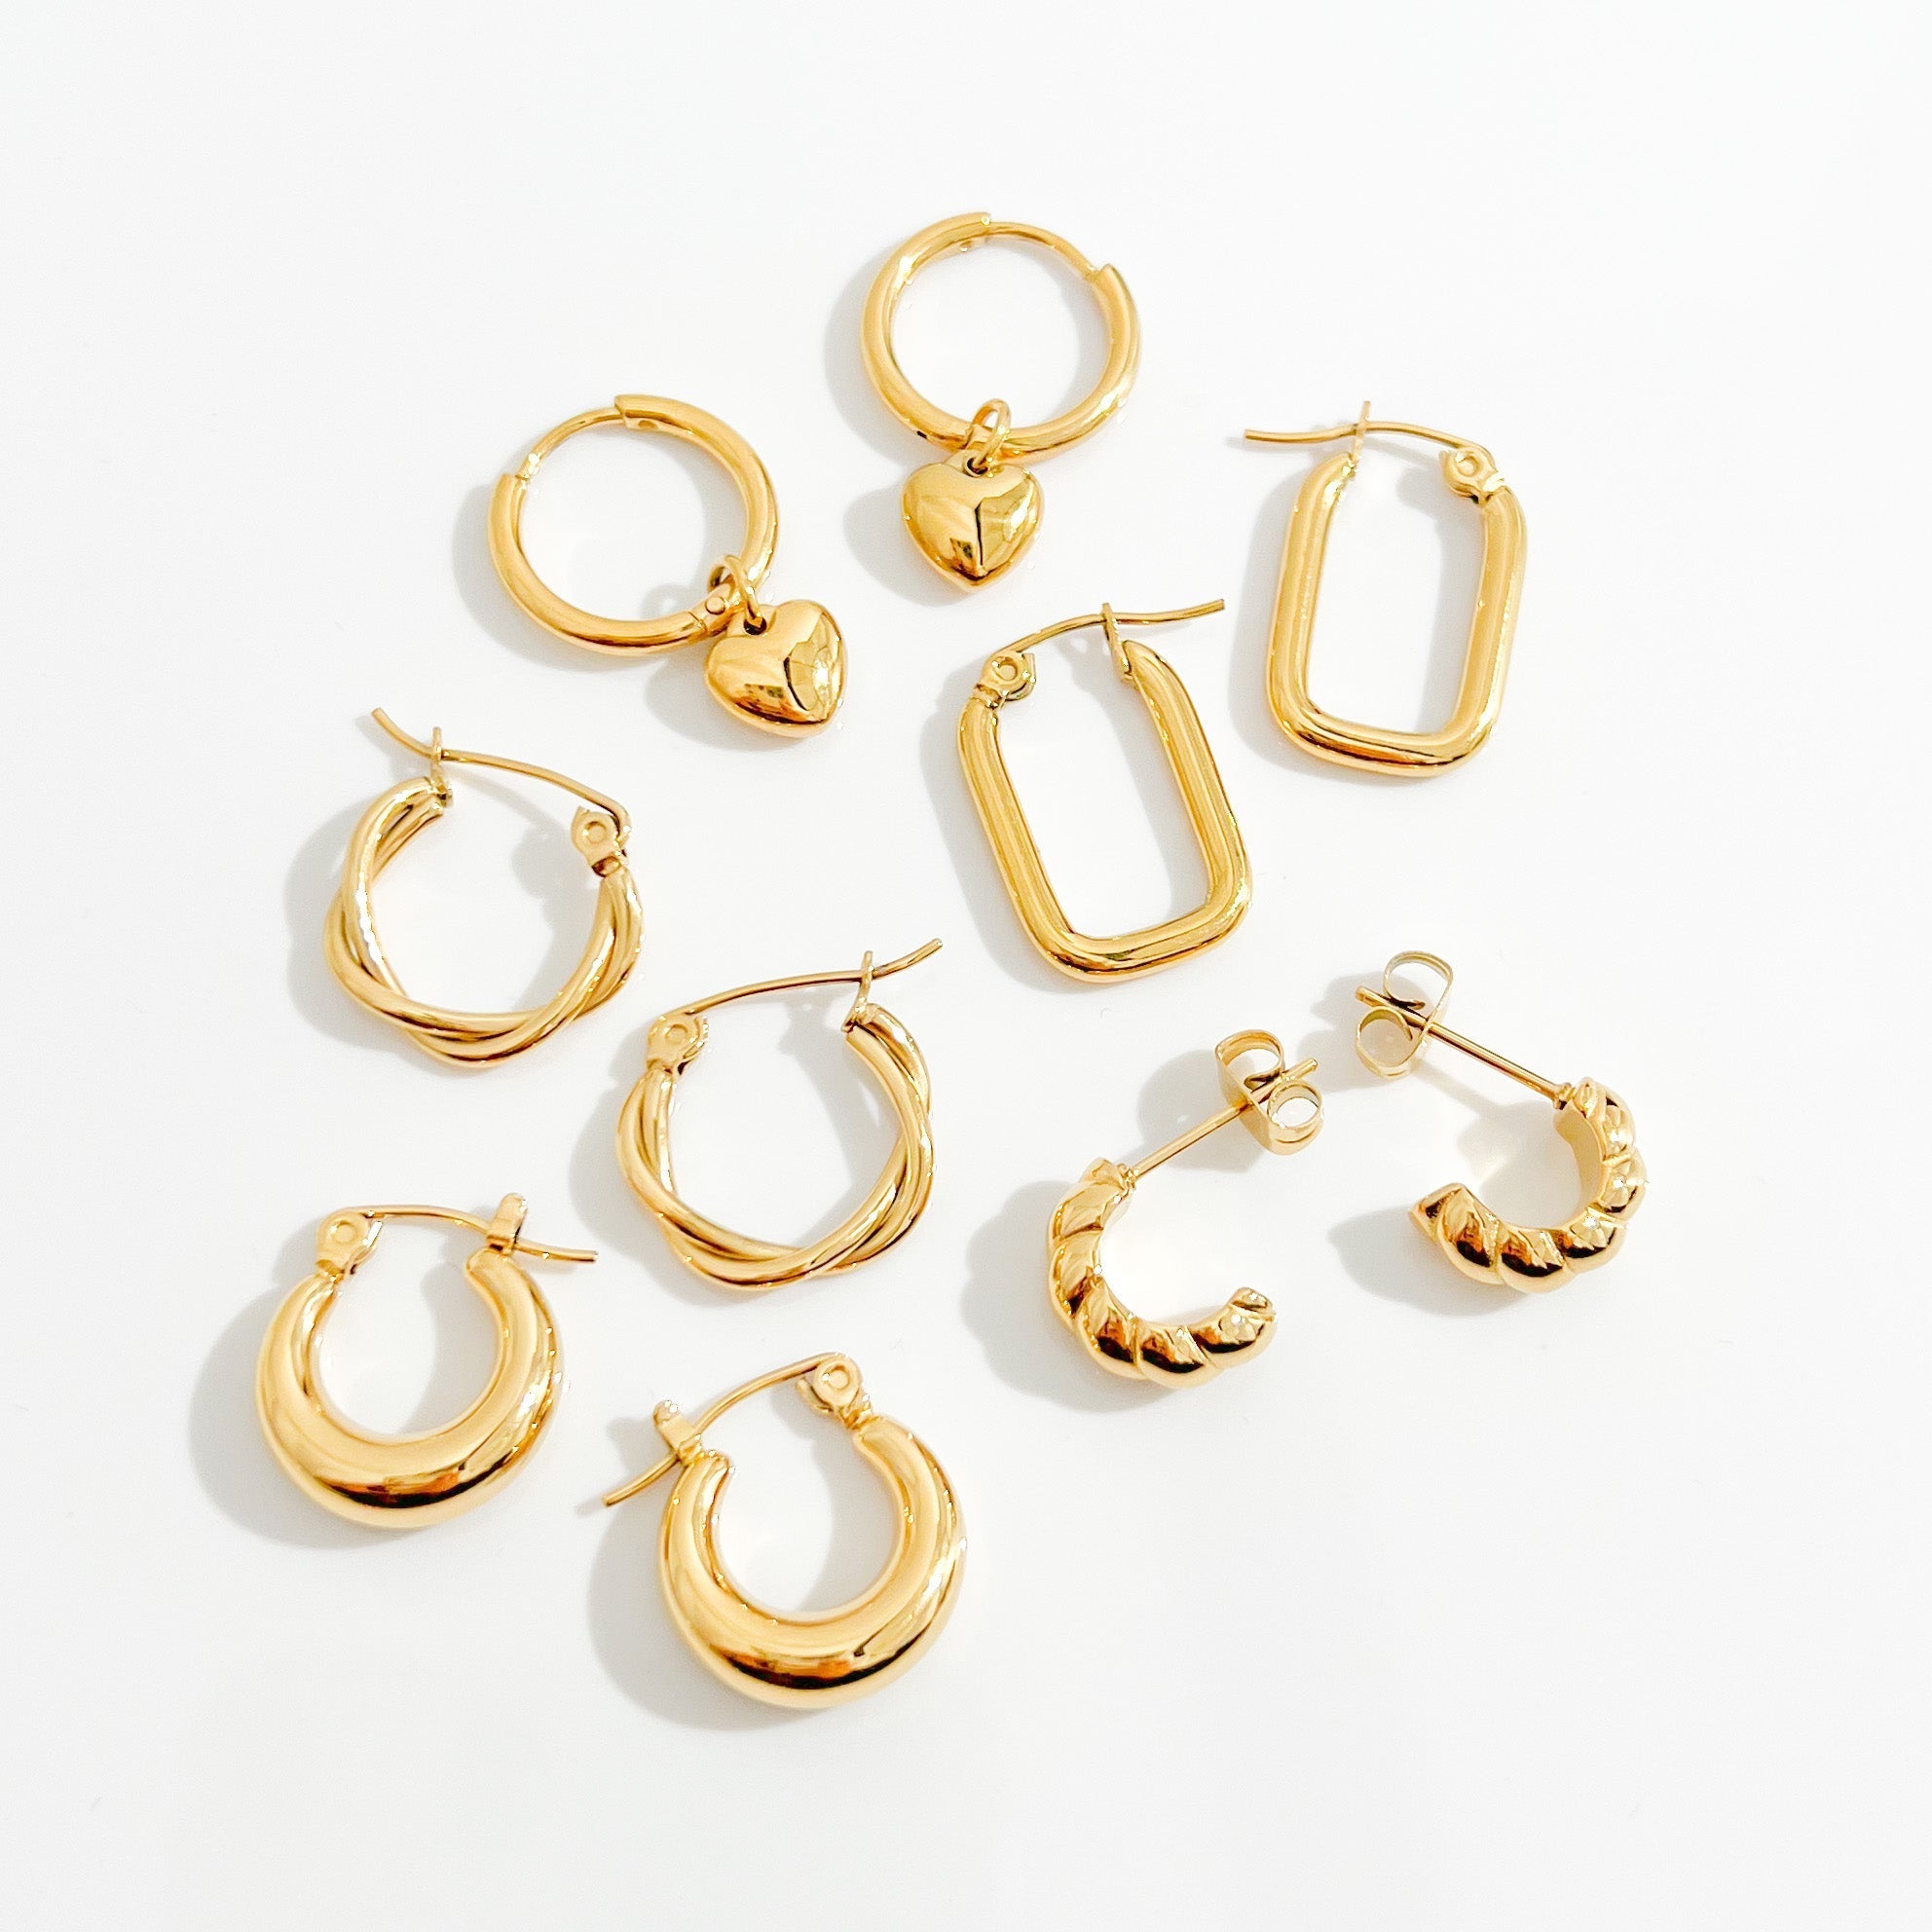 Best Sellers Earrings Gold Bundle - Flaire & Co.